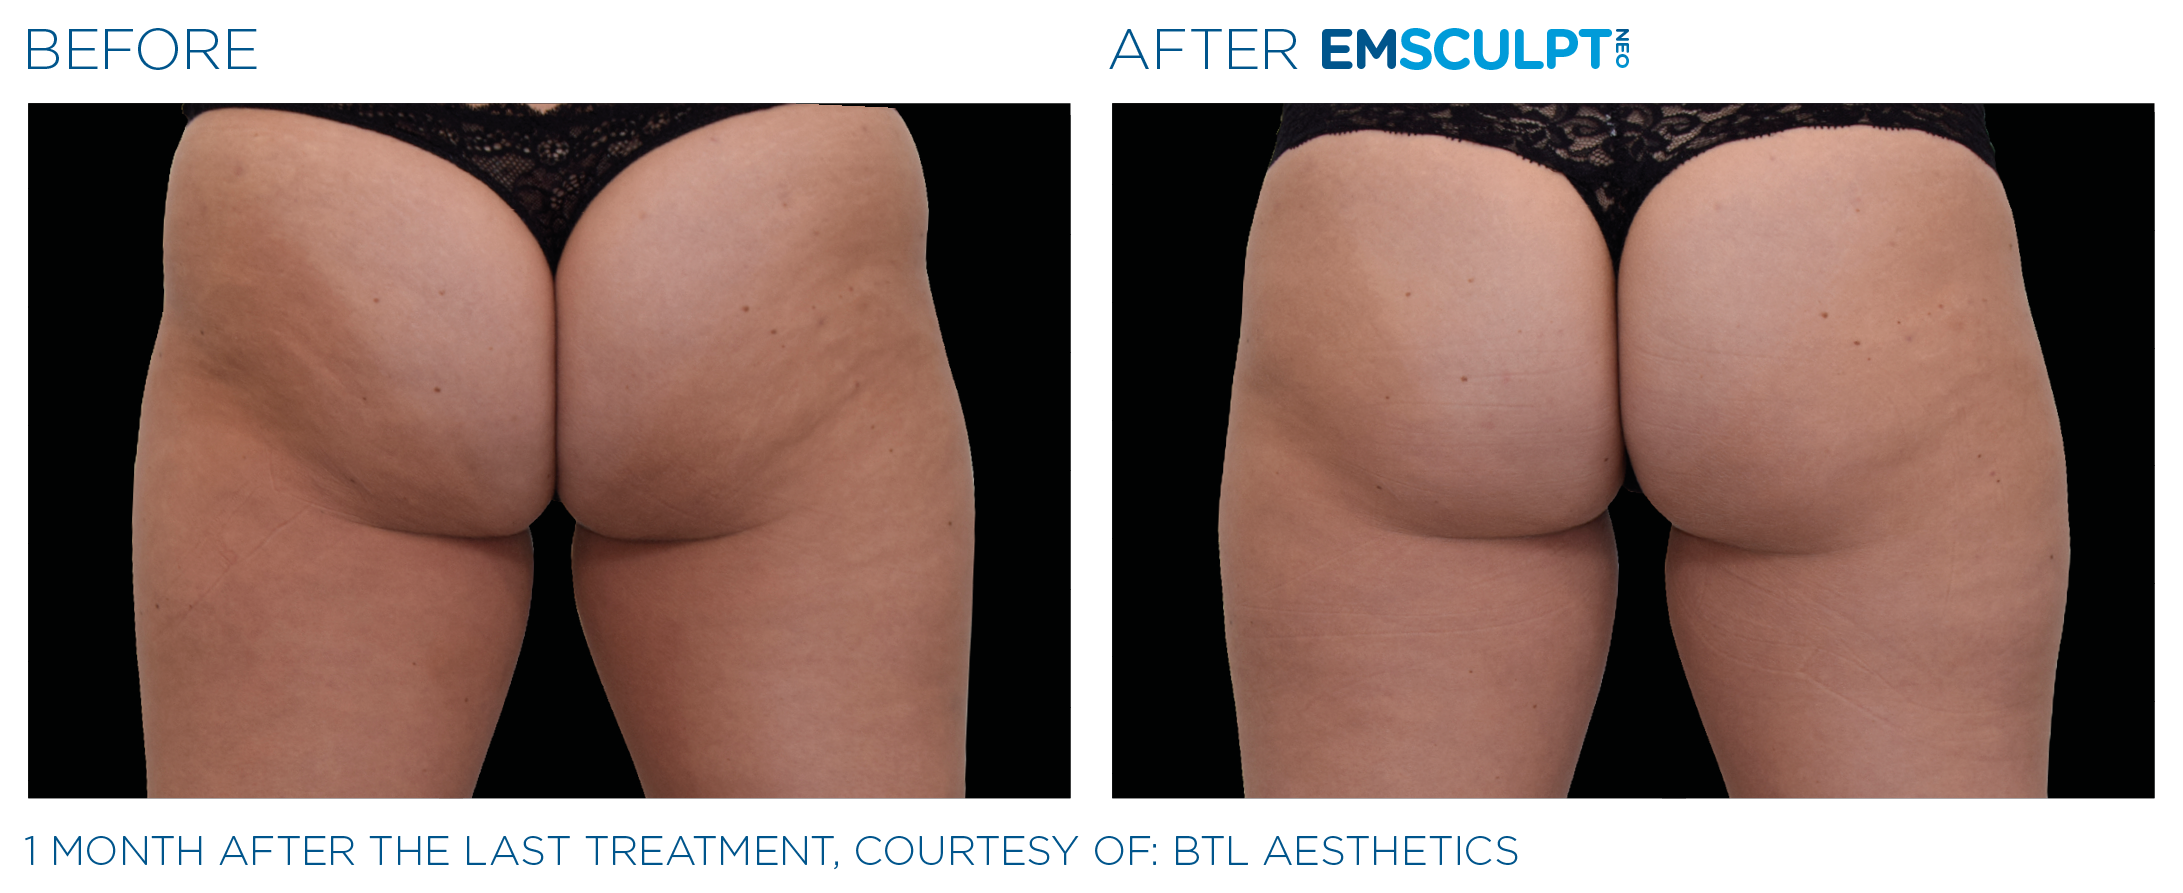 Emsculpt neo - female - Before and After - Glutes - Amaira Med spa